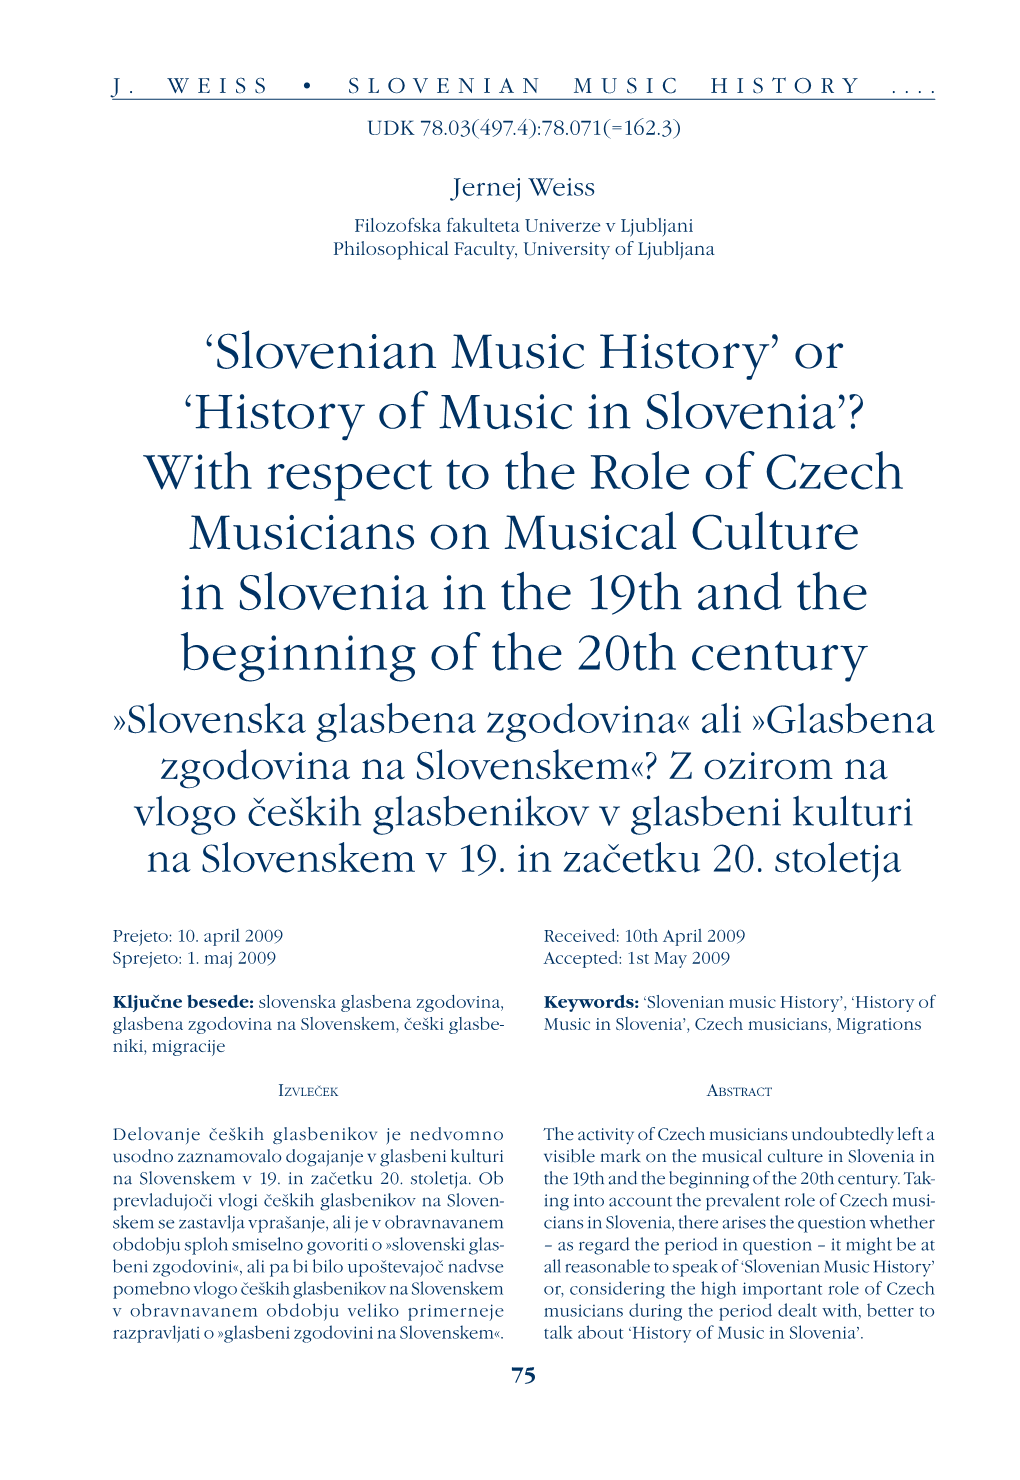 'Slovenian Music History' Or 'History of Music in Slovenia'? with Respect To